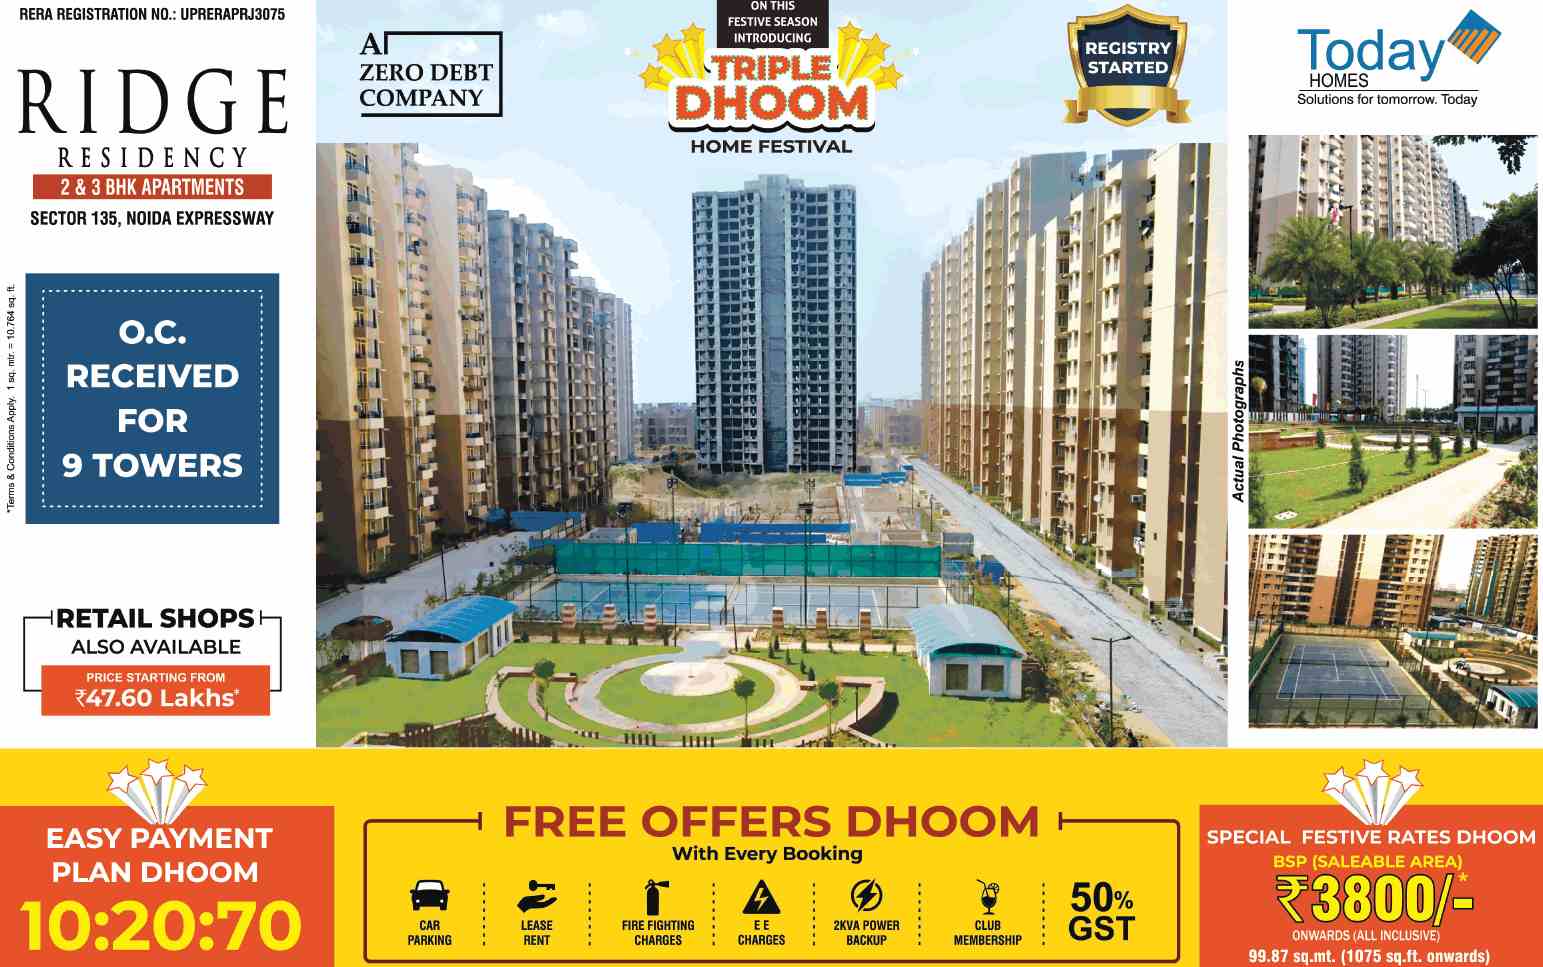 Avail the easy payment plan of 10:20:70 at Today Ridge Residency in Sector 135, Noida